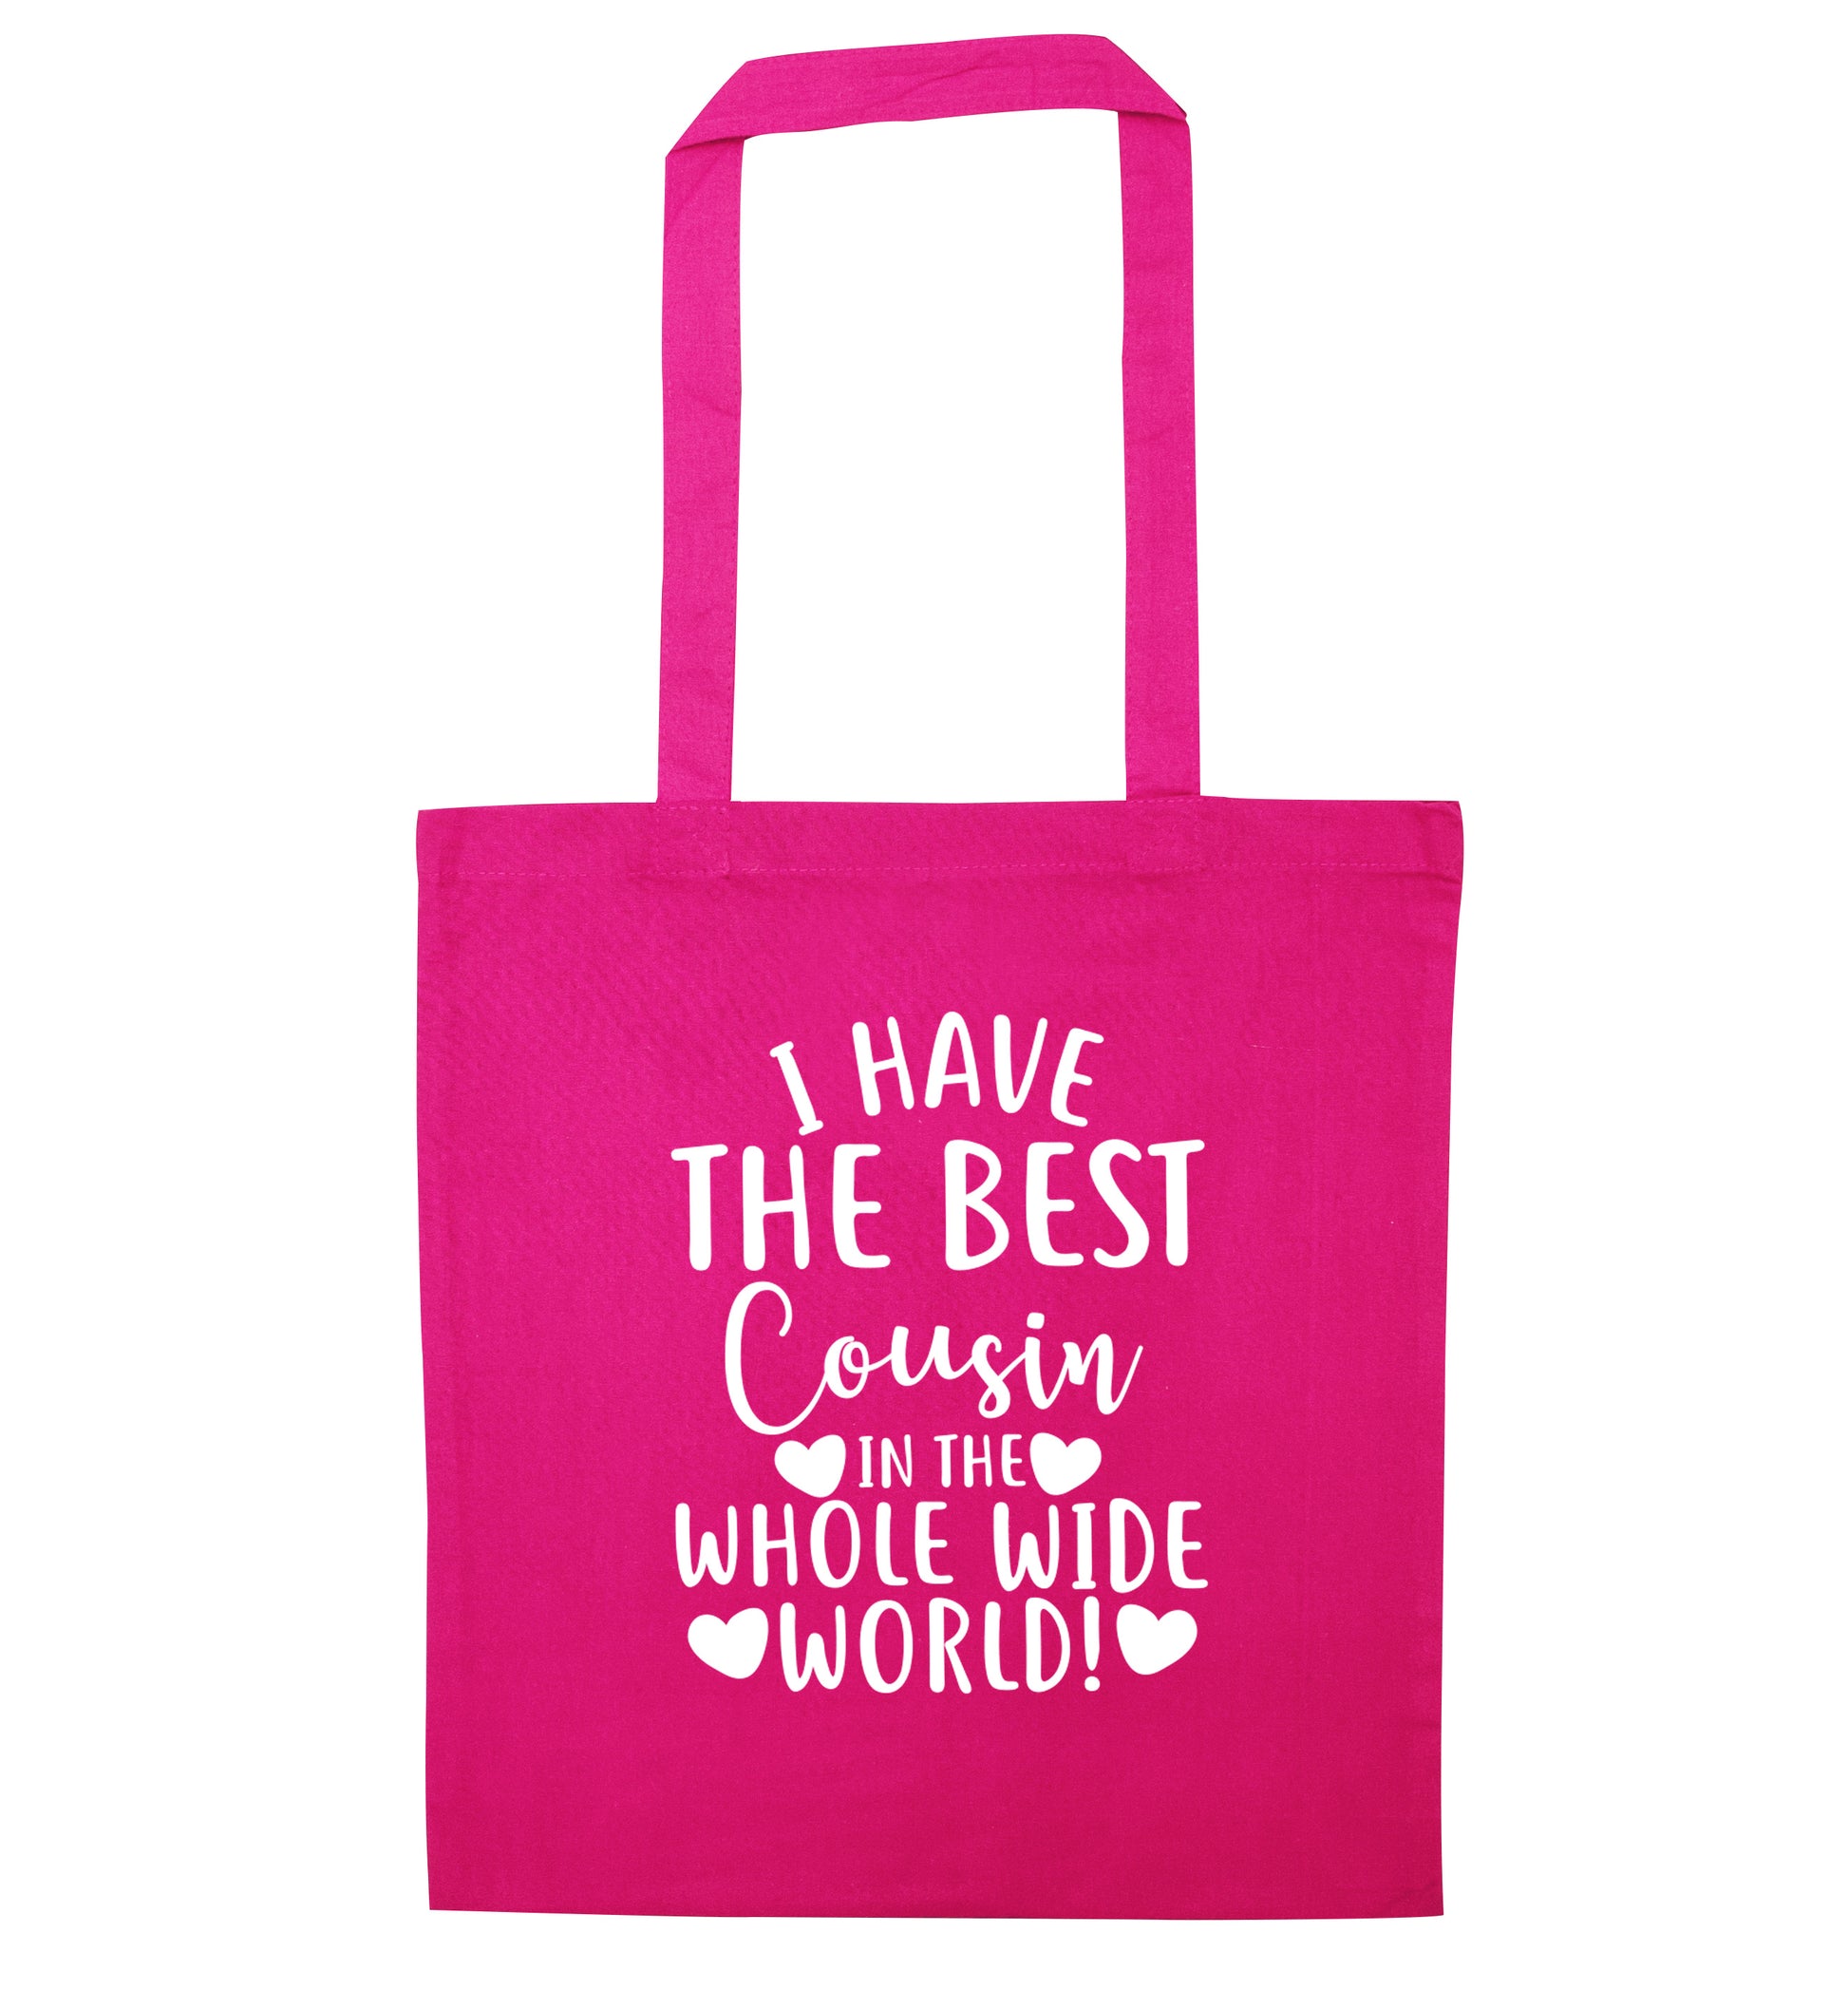 I have the best cousin in the whole wide world! pink tote bag